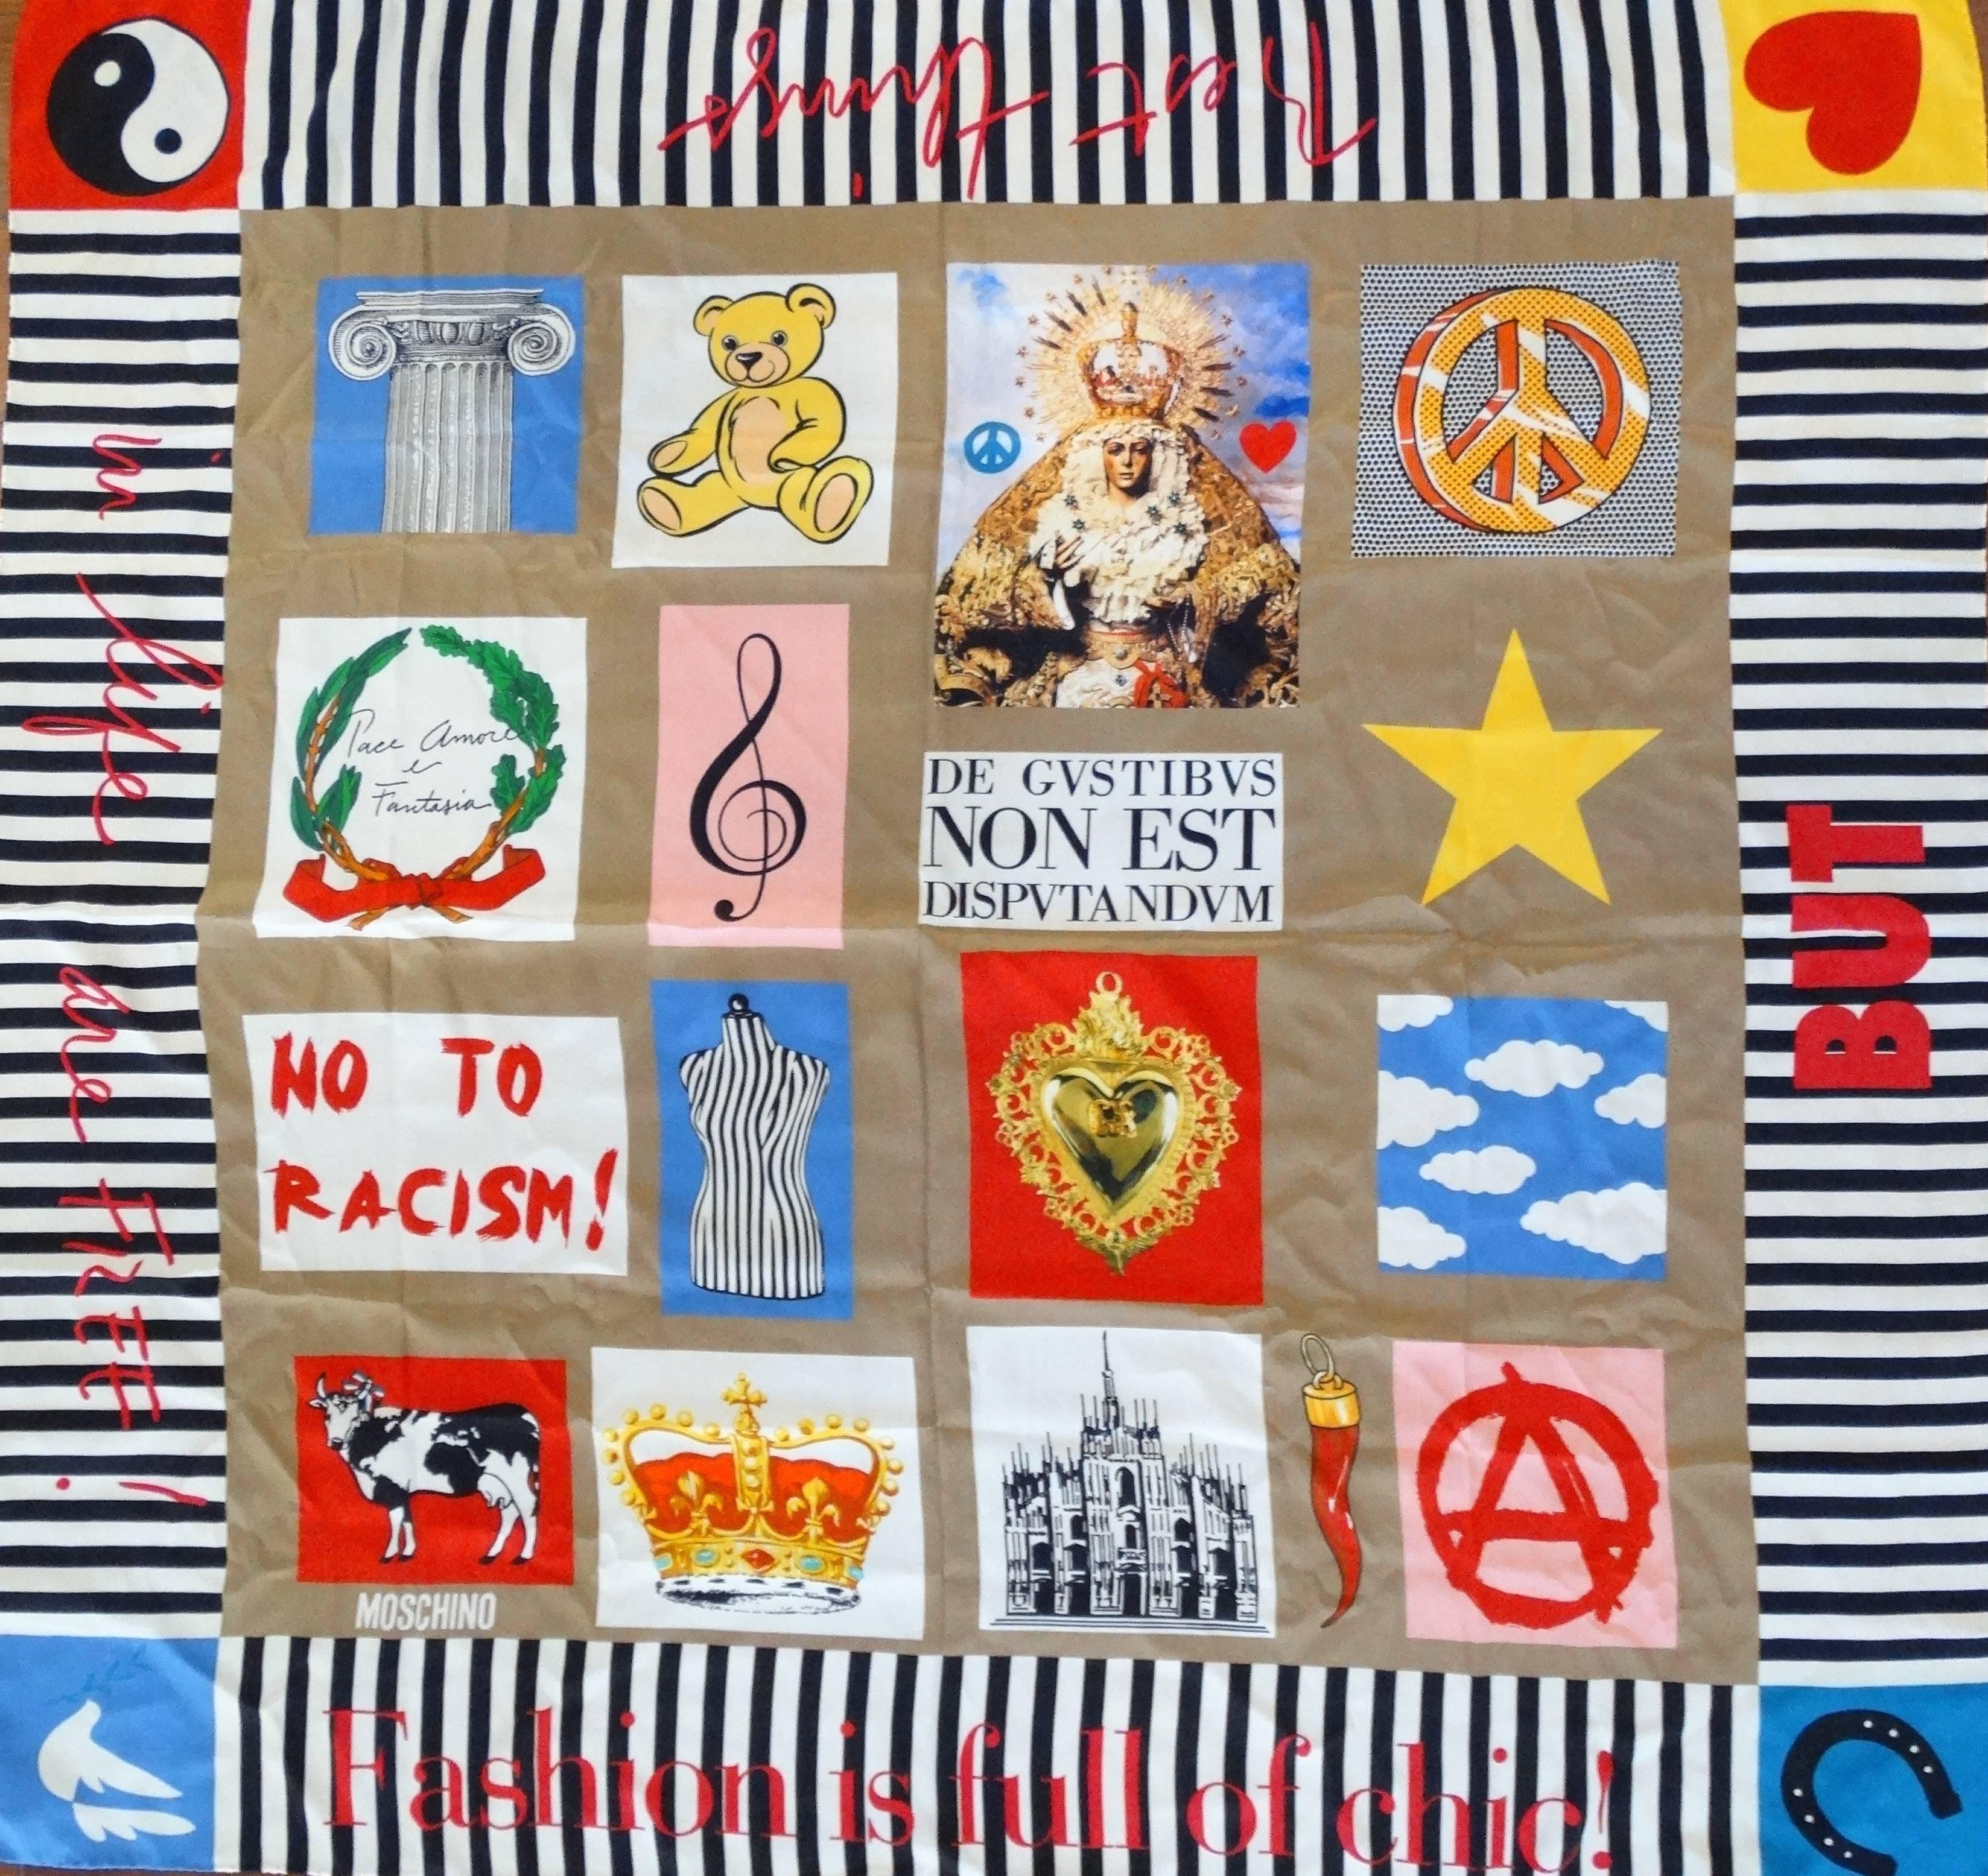 Make a statement with out 1990s Moschino silk scarf! Amazing pop art print- striped trim with horseshoes, hearts, ying yangs and doves. Central print featuring a cow, the anarchy symbol and No to Racism! Red text along the stripes reads Fashion is